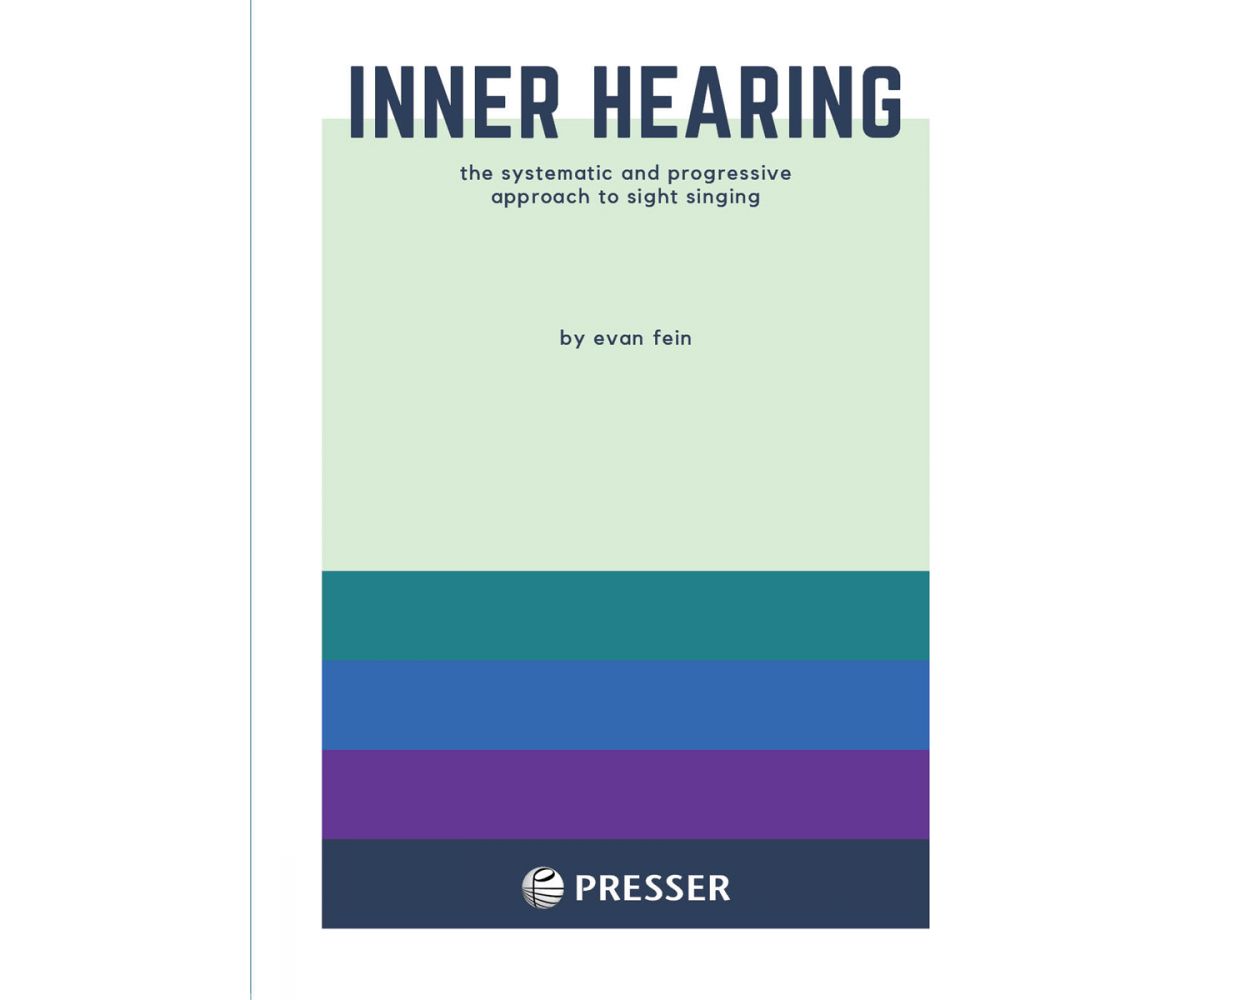 Inner Hearing - The Systematic and Progressive Approach to Sight Singing